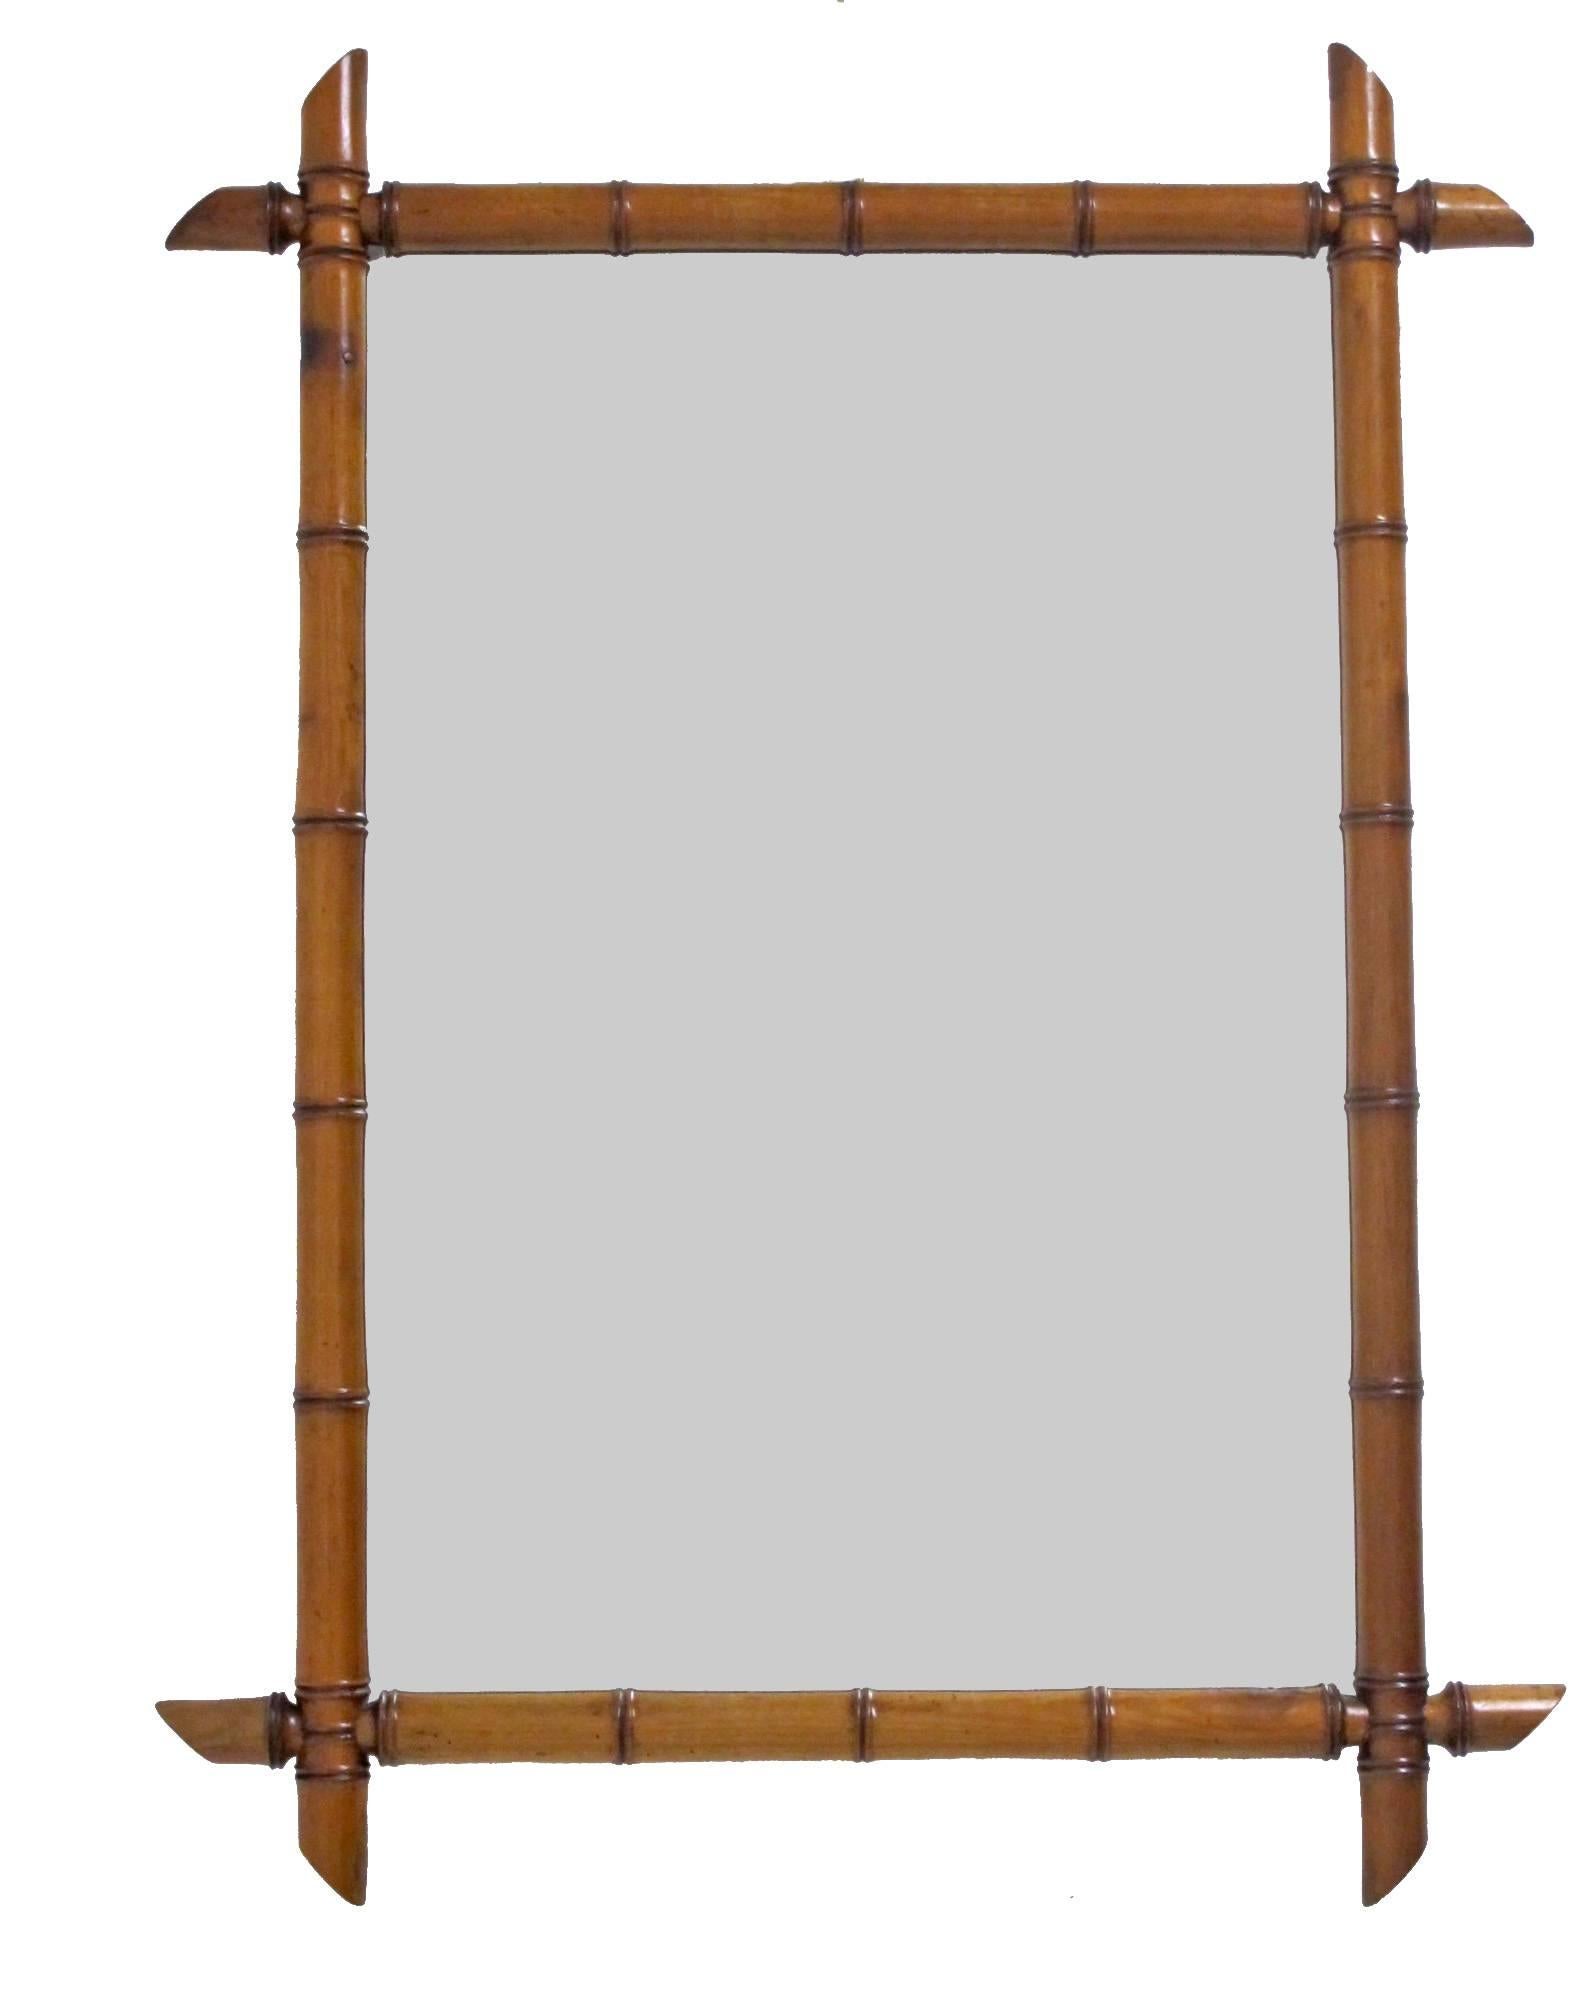 A Louis Philippe period mirror. Wooden faux bamboo style frame with newly replaced mirror. France mid-19th century.